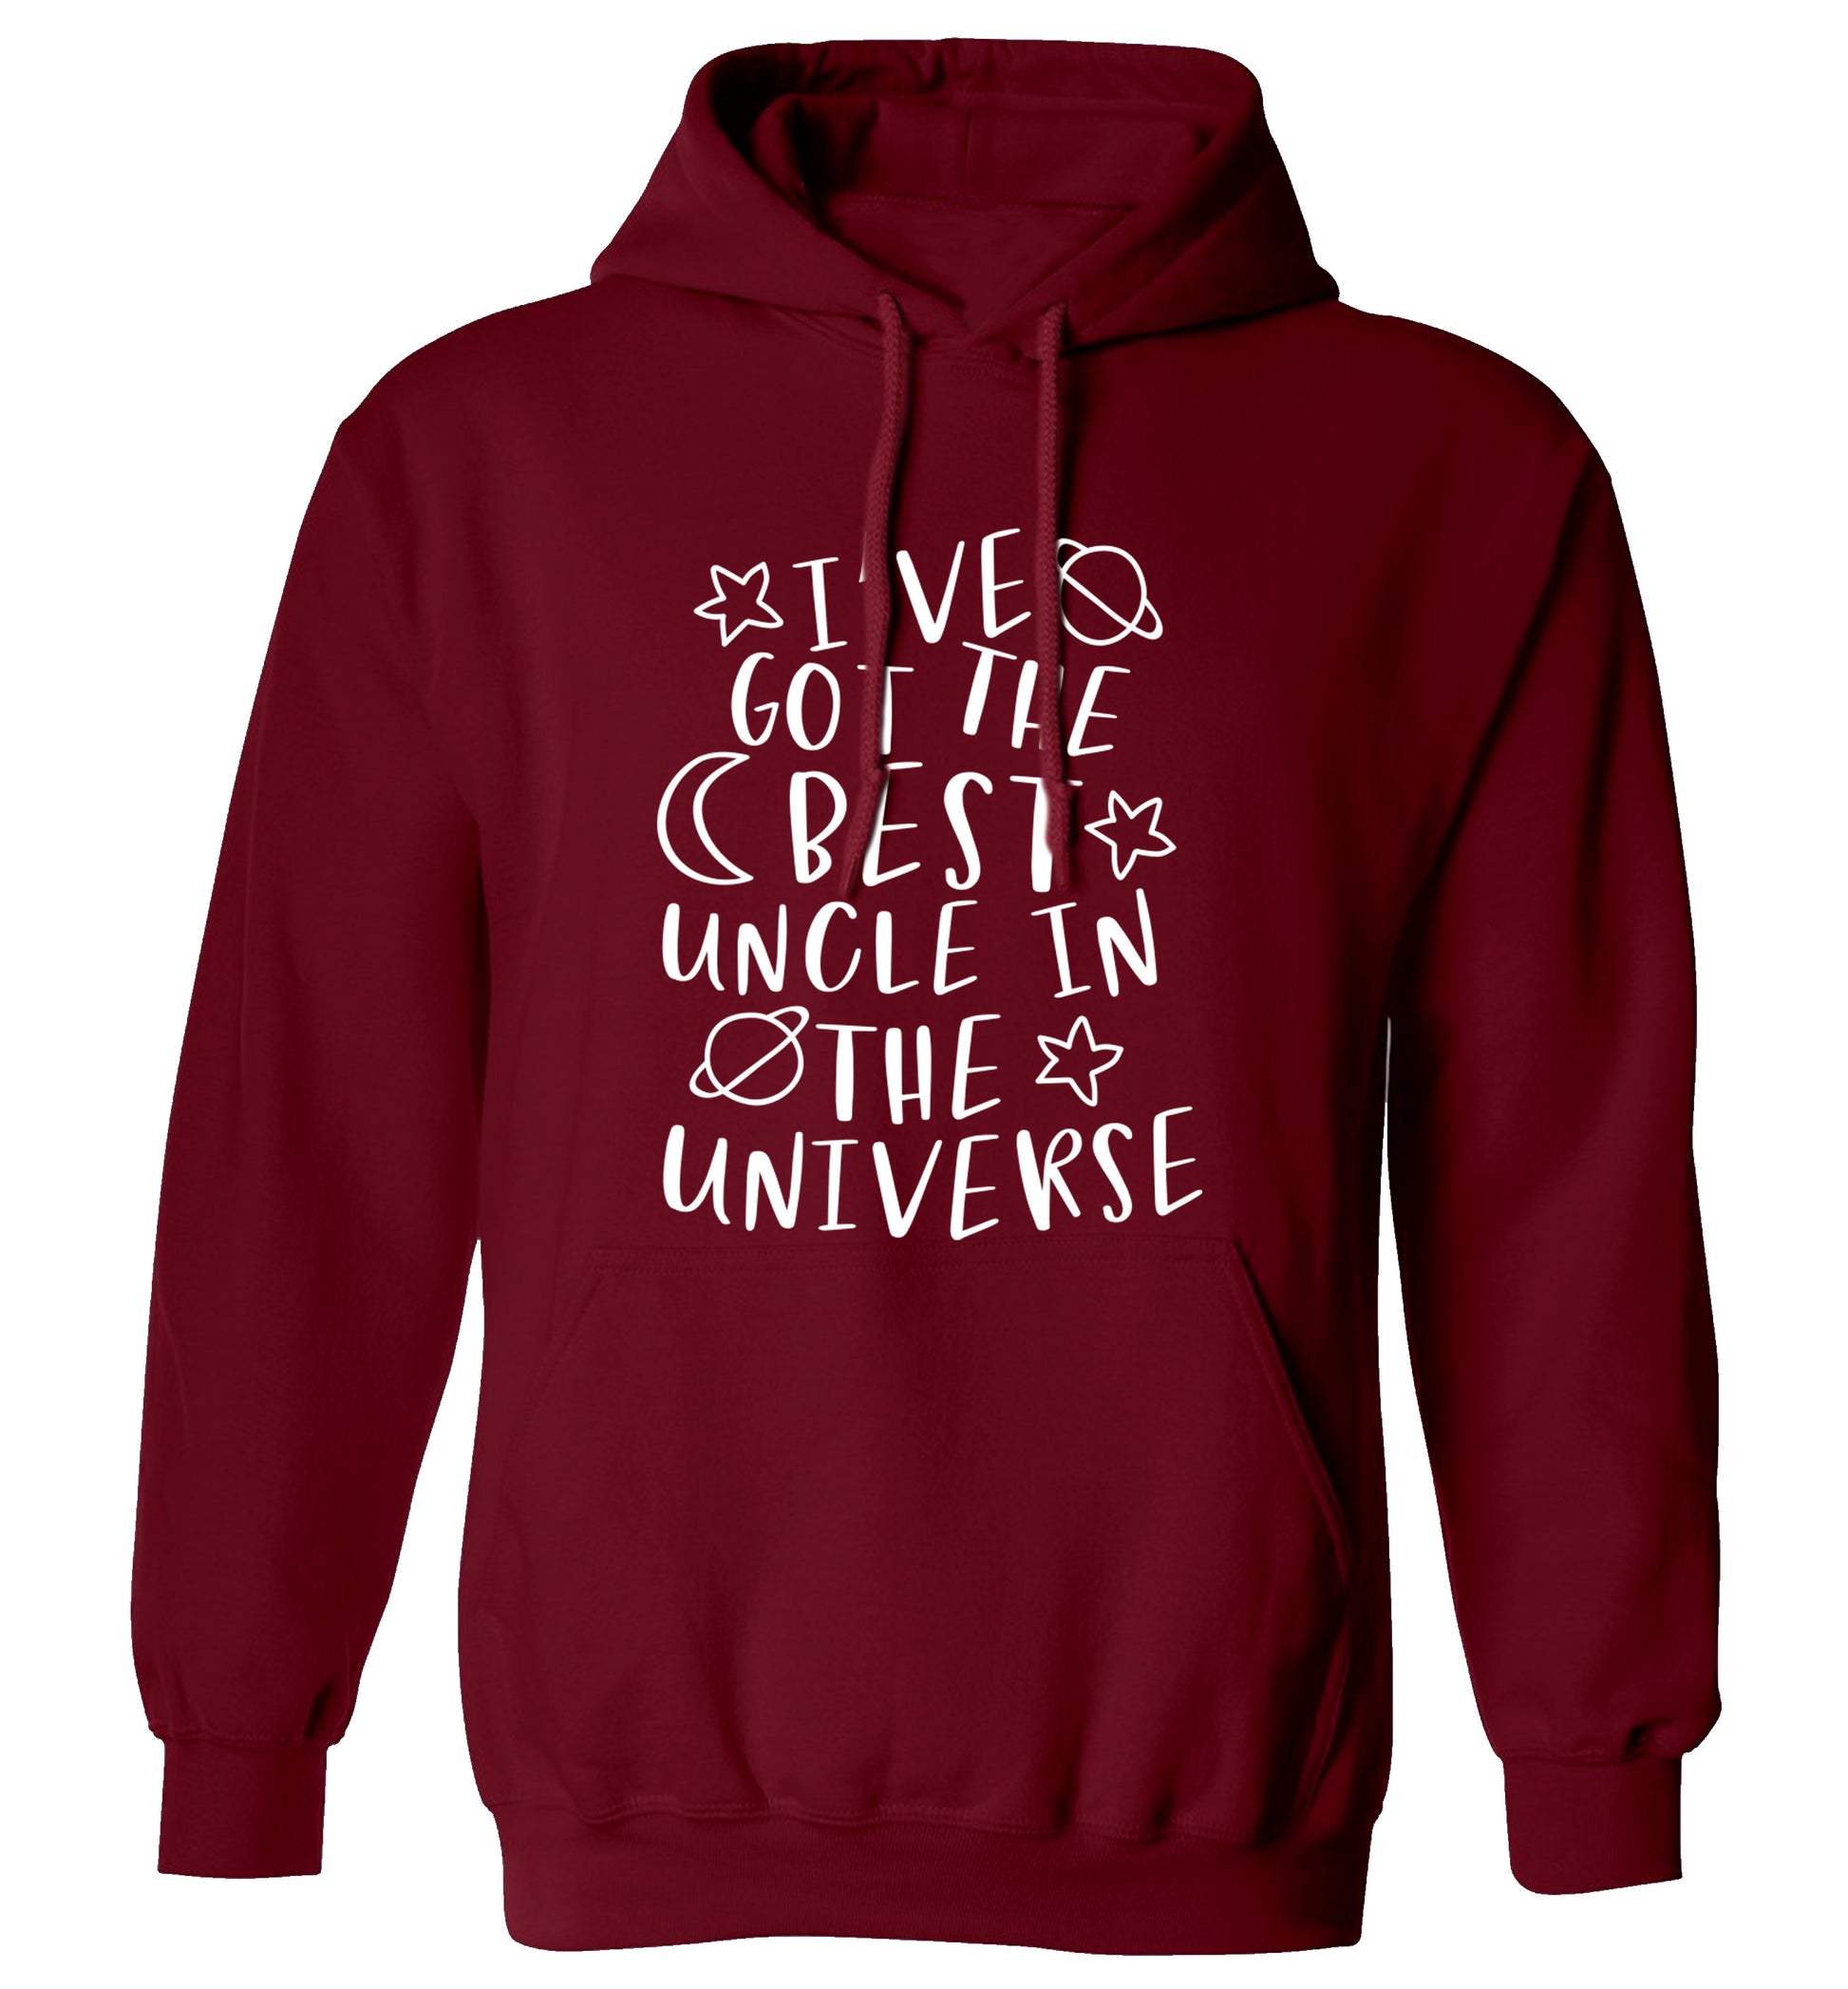 I've got the best uncle in the universe adults unisex maroon hoodie 2XL